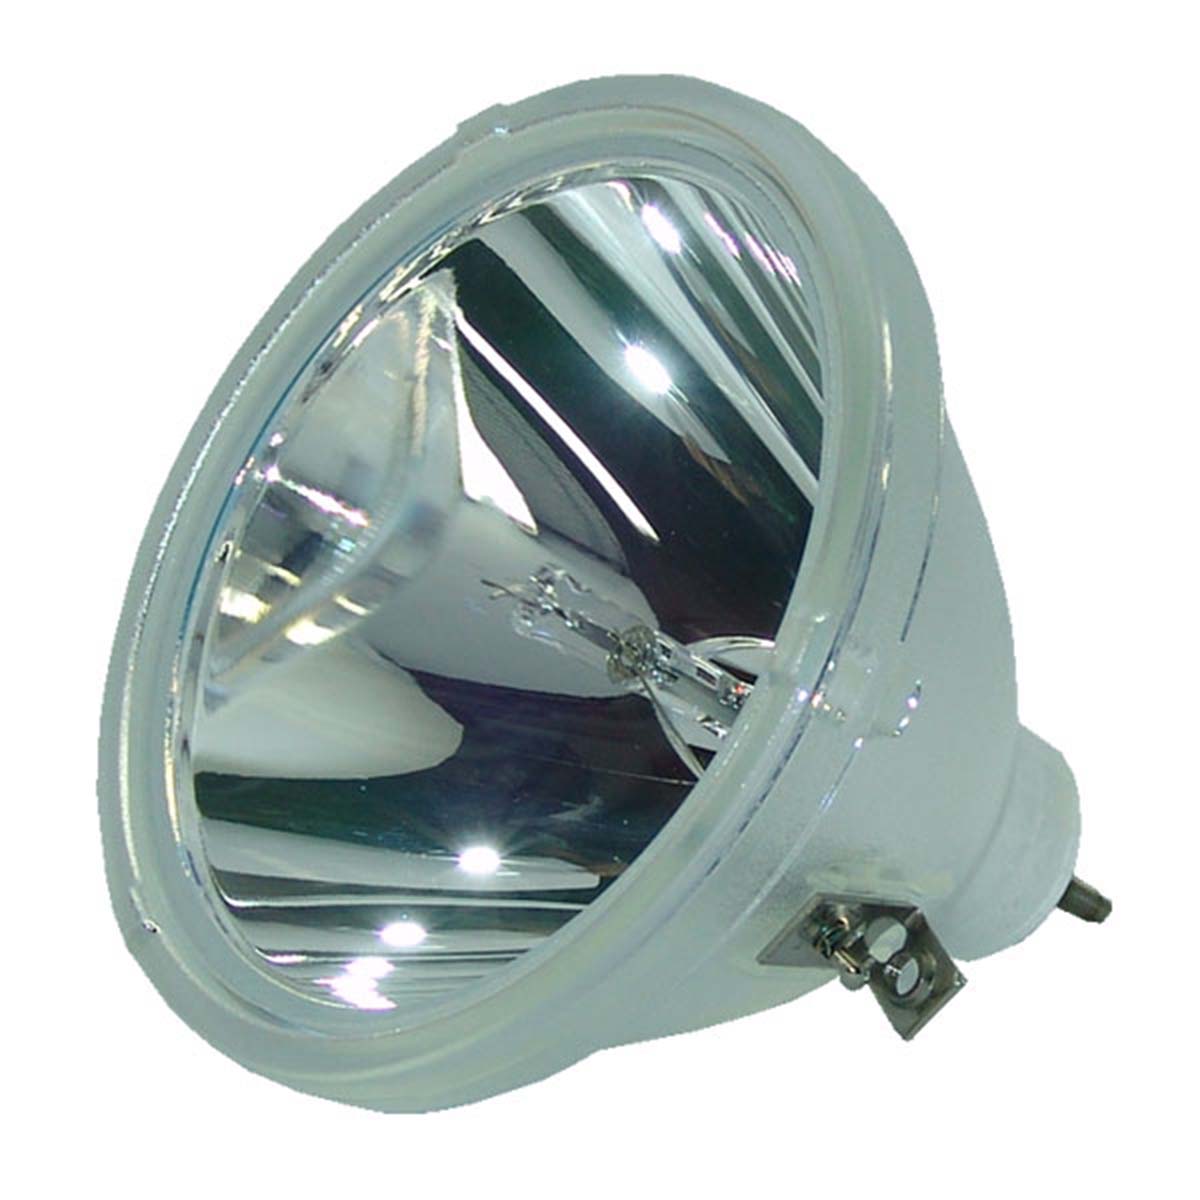 Synelec LM-800 Osram Projector Bare Lamp